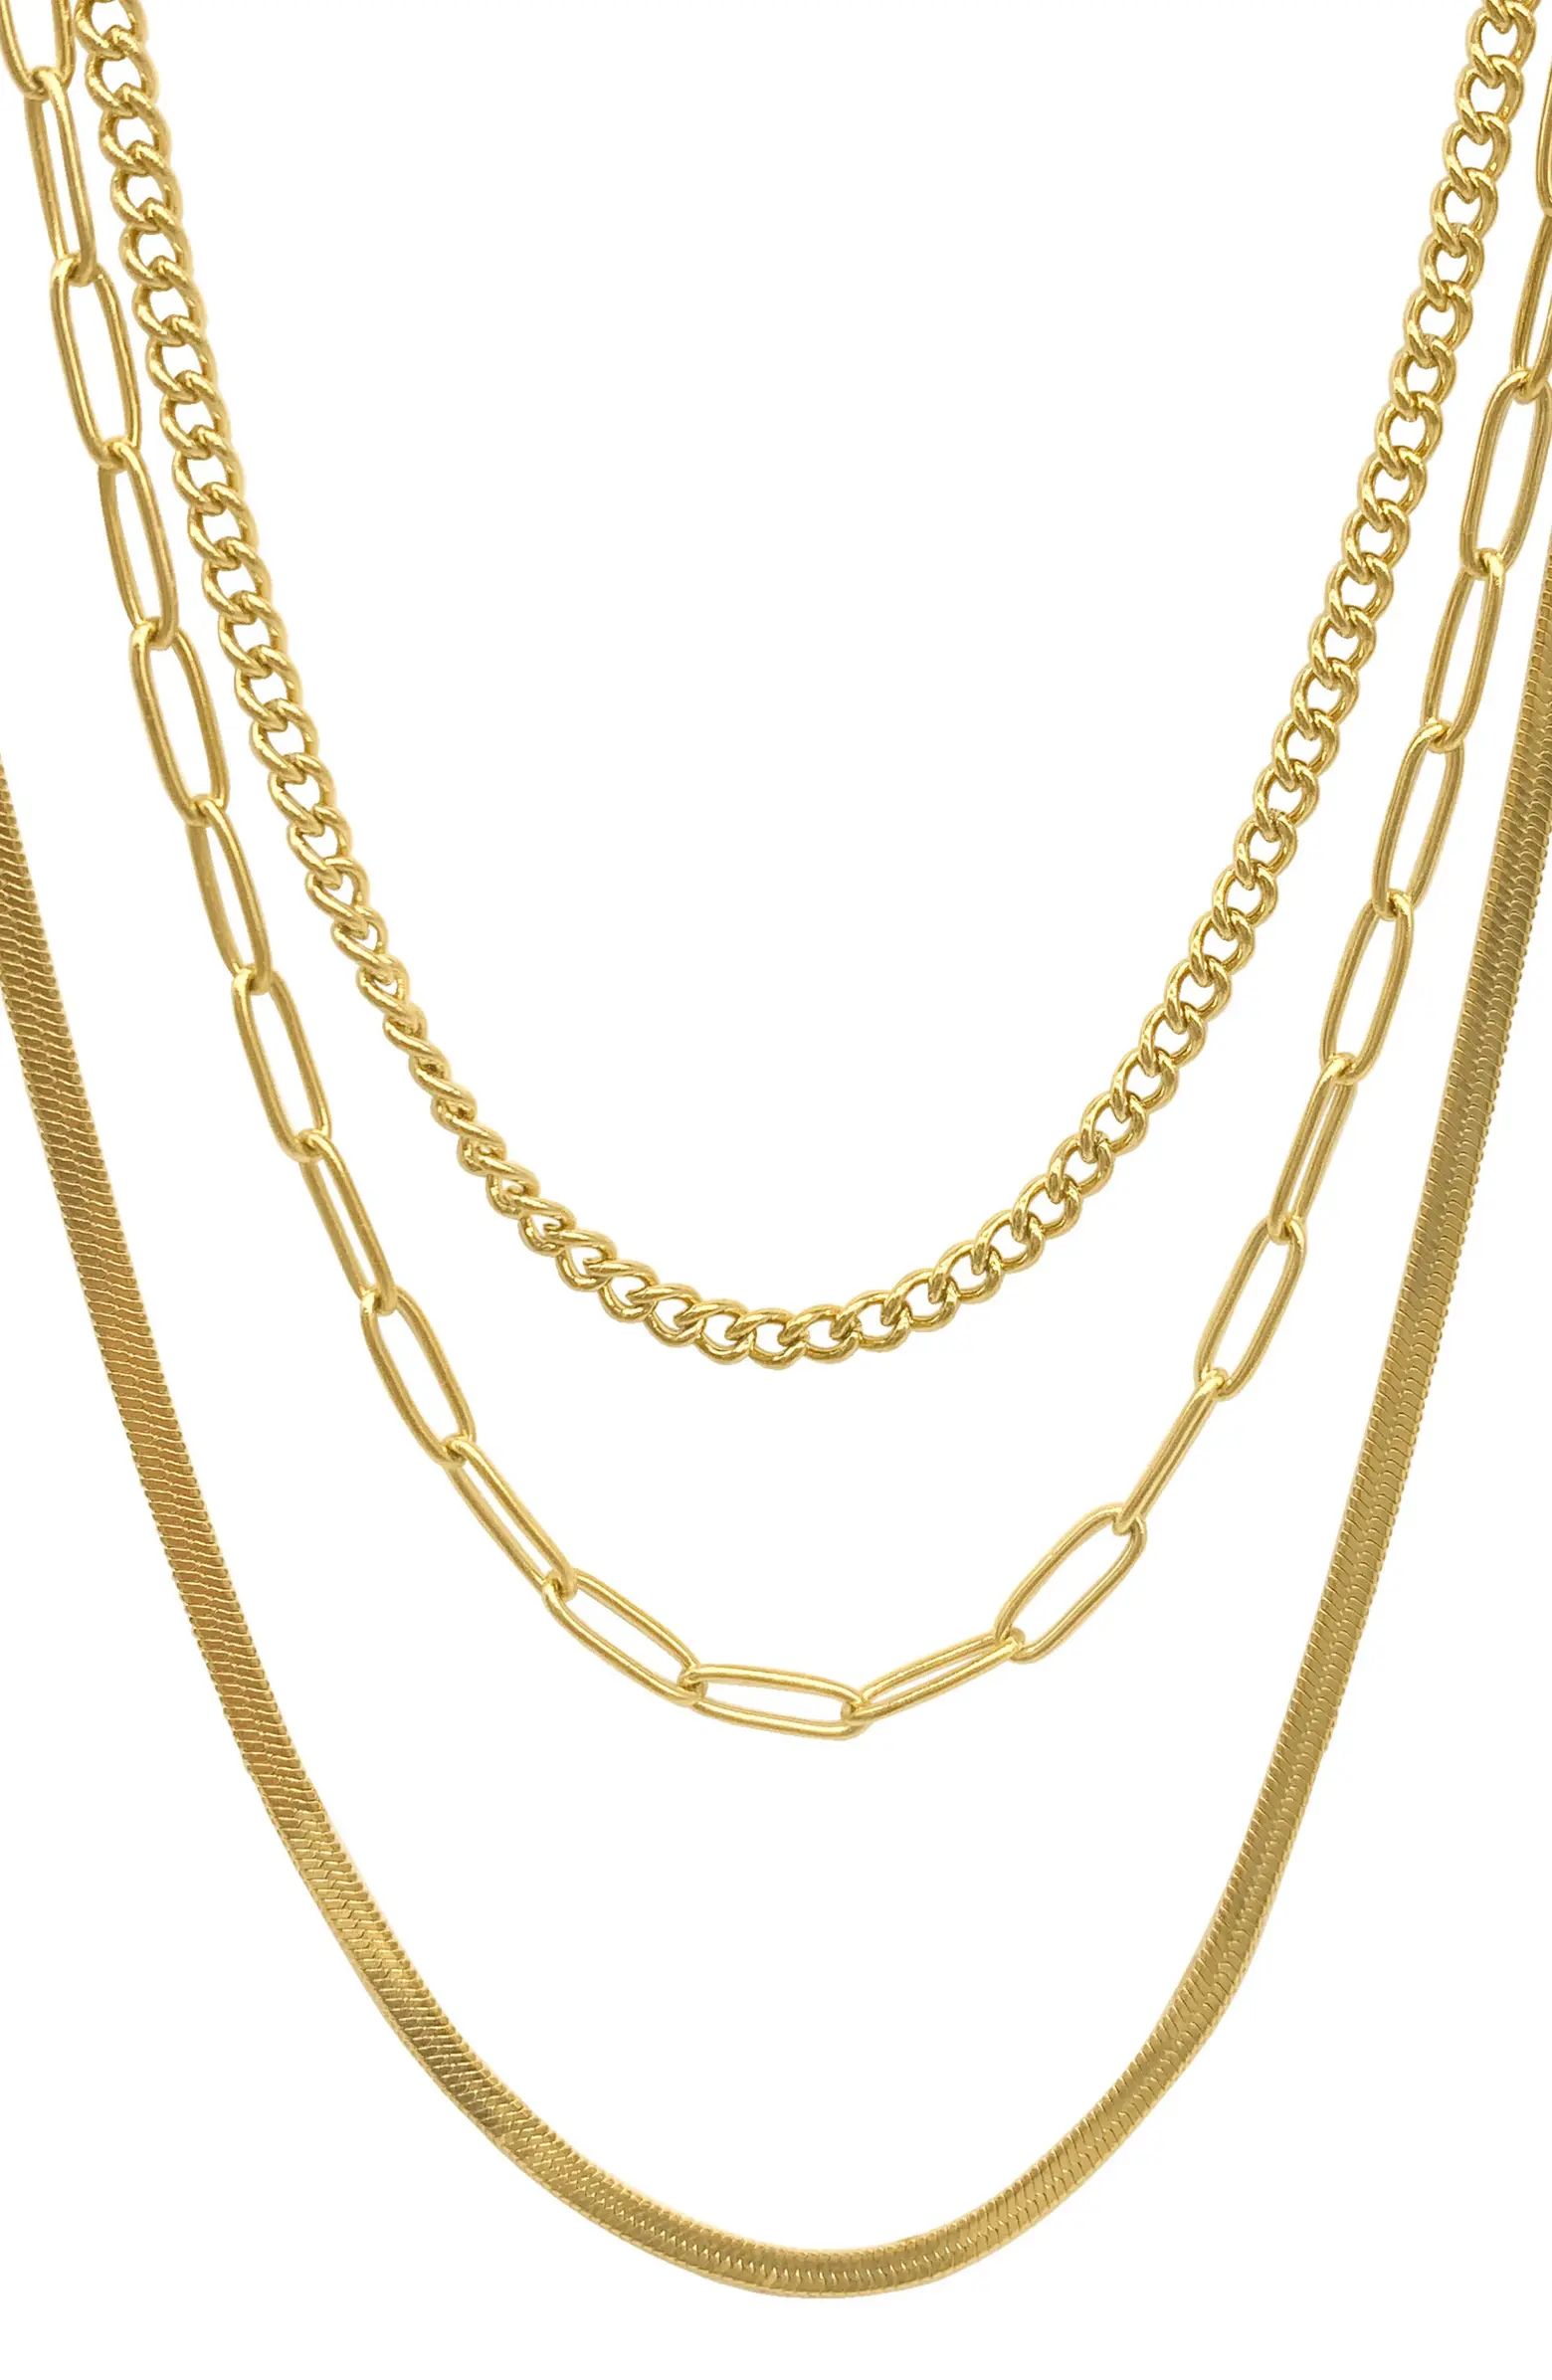 Water Resistant 14K Yellow Gold Paperclip, Curb, & Snake Chain Necklace Set | Nordstrom Rack